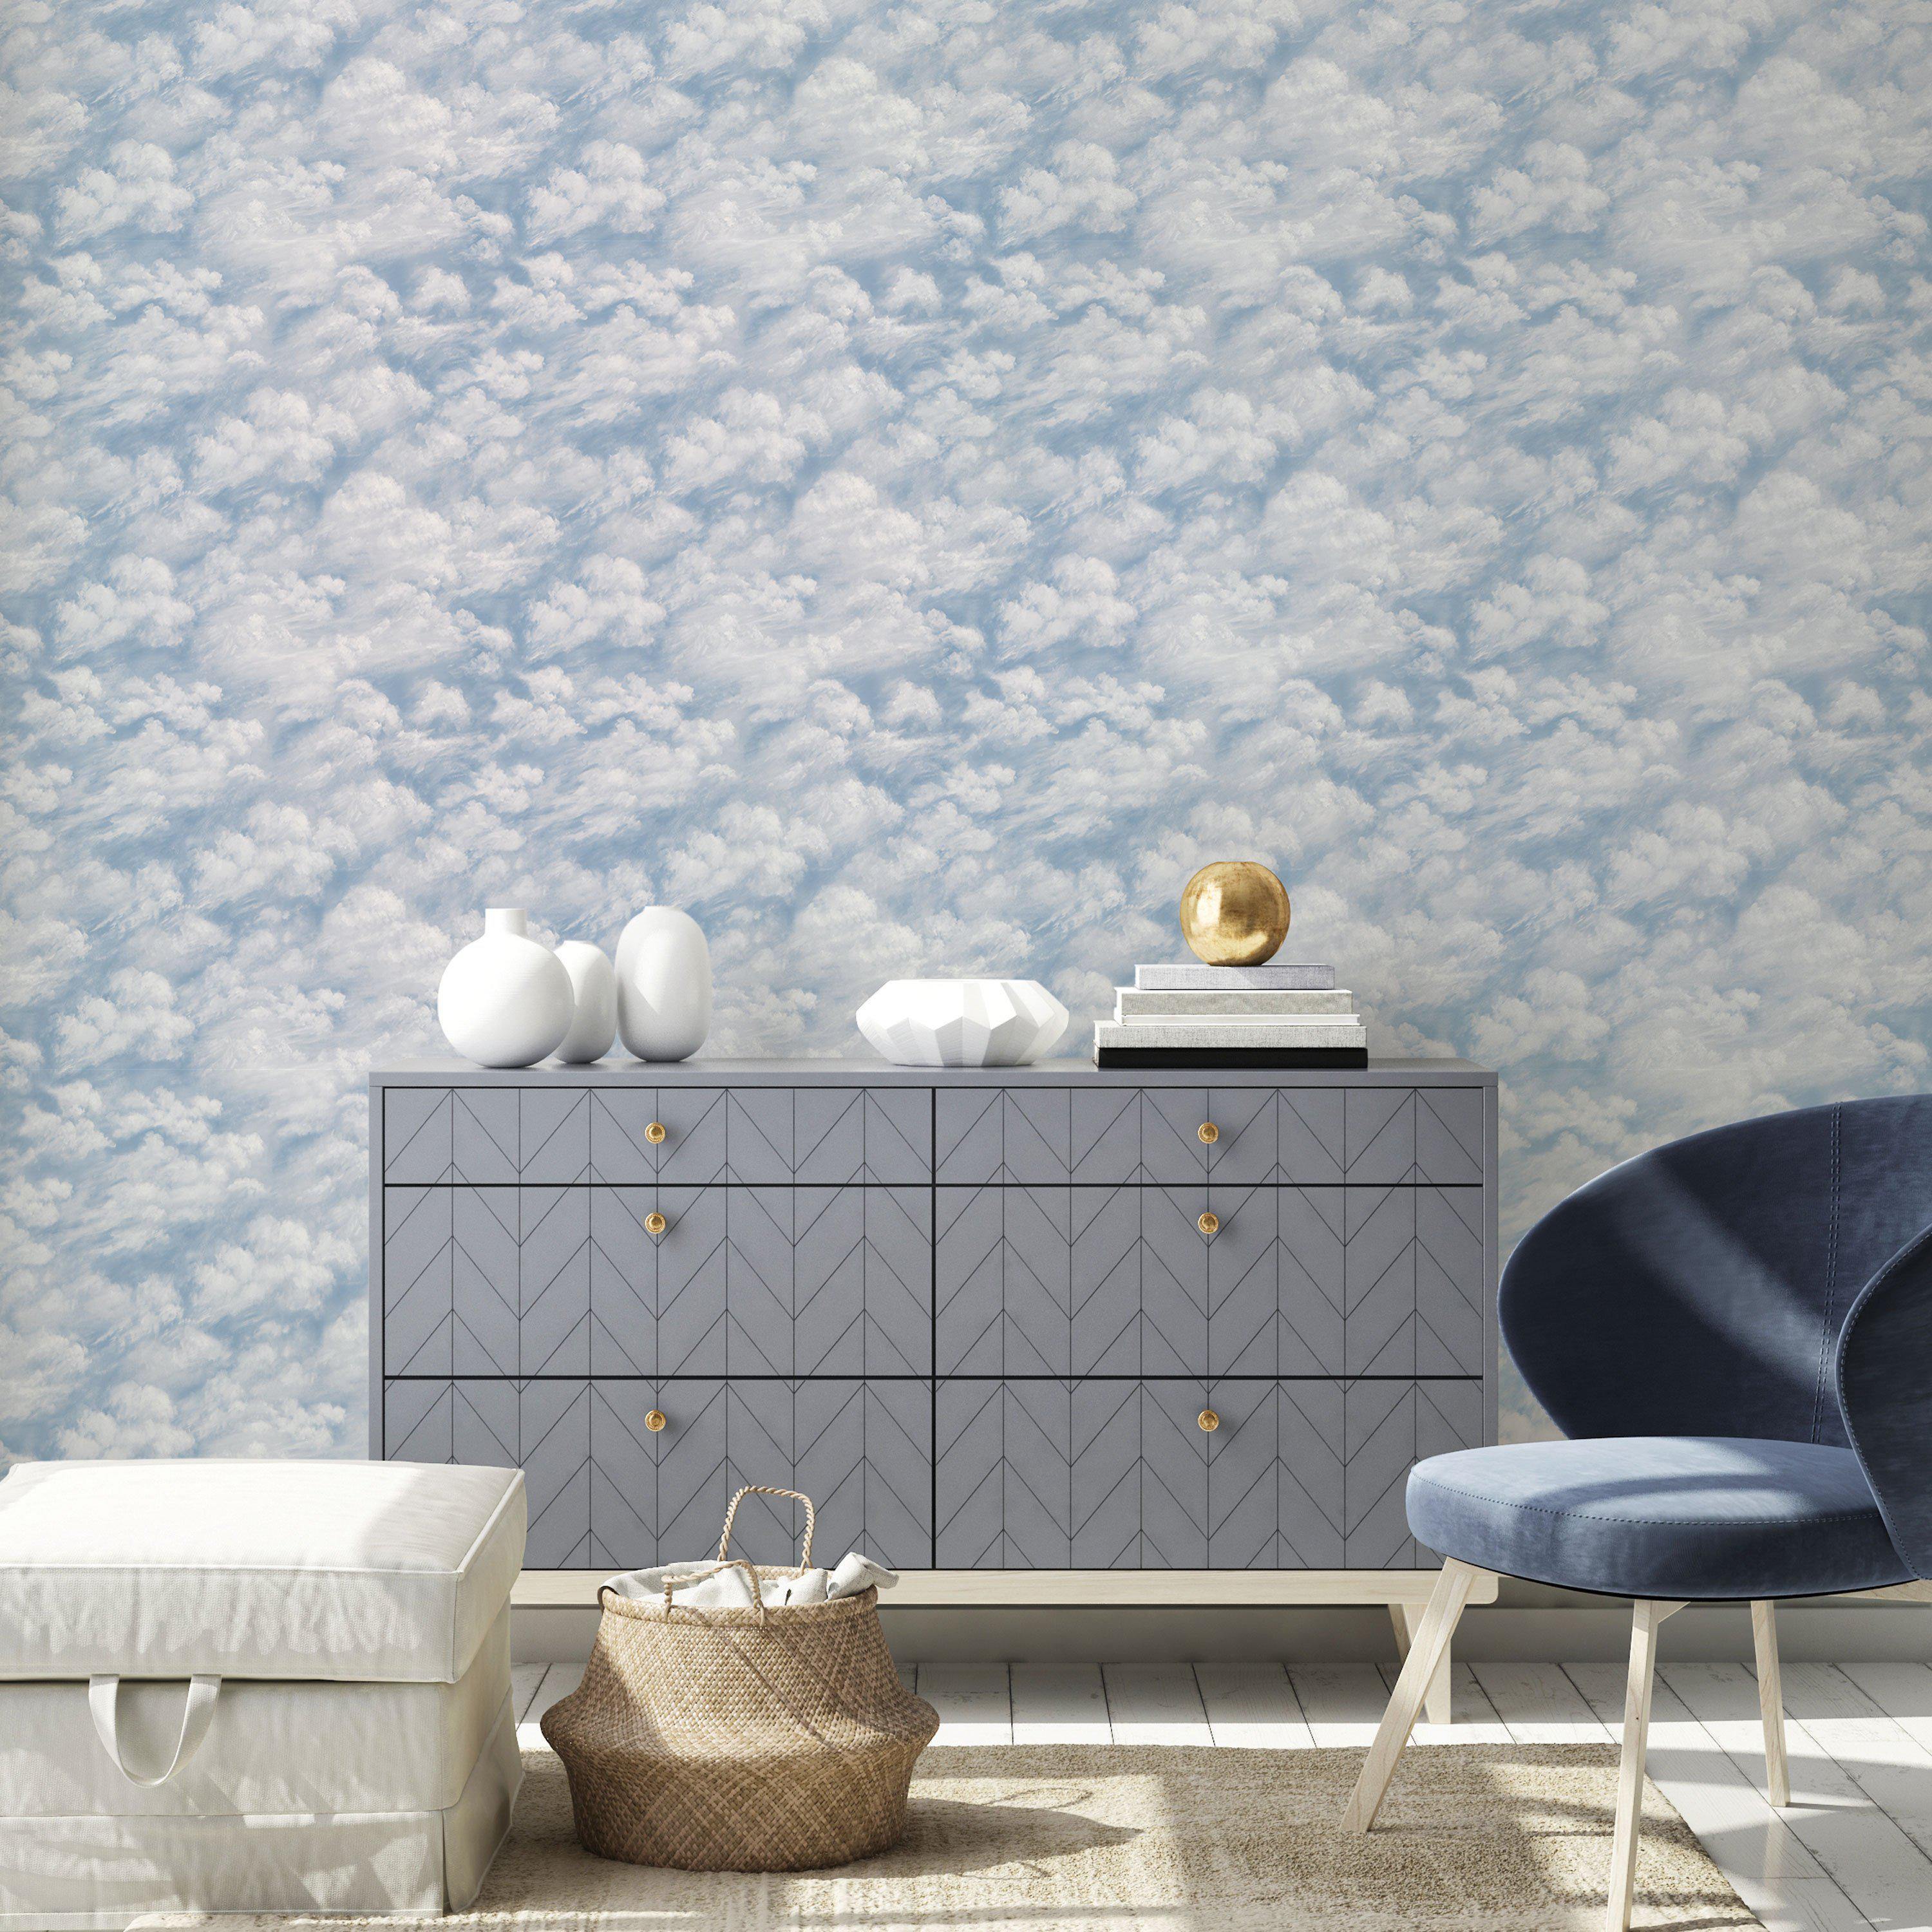 Tempaper Designs LIFESTYLE - Clouds Sky Blue Peel and Stick Wallpaper